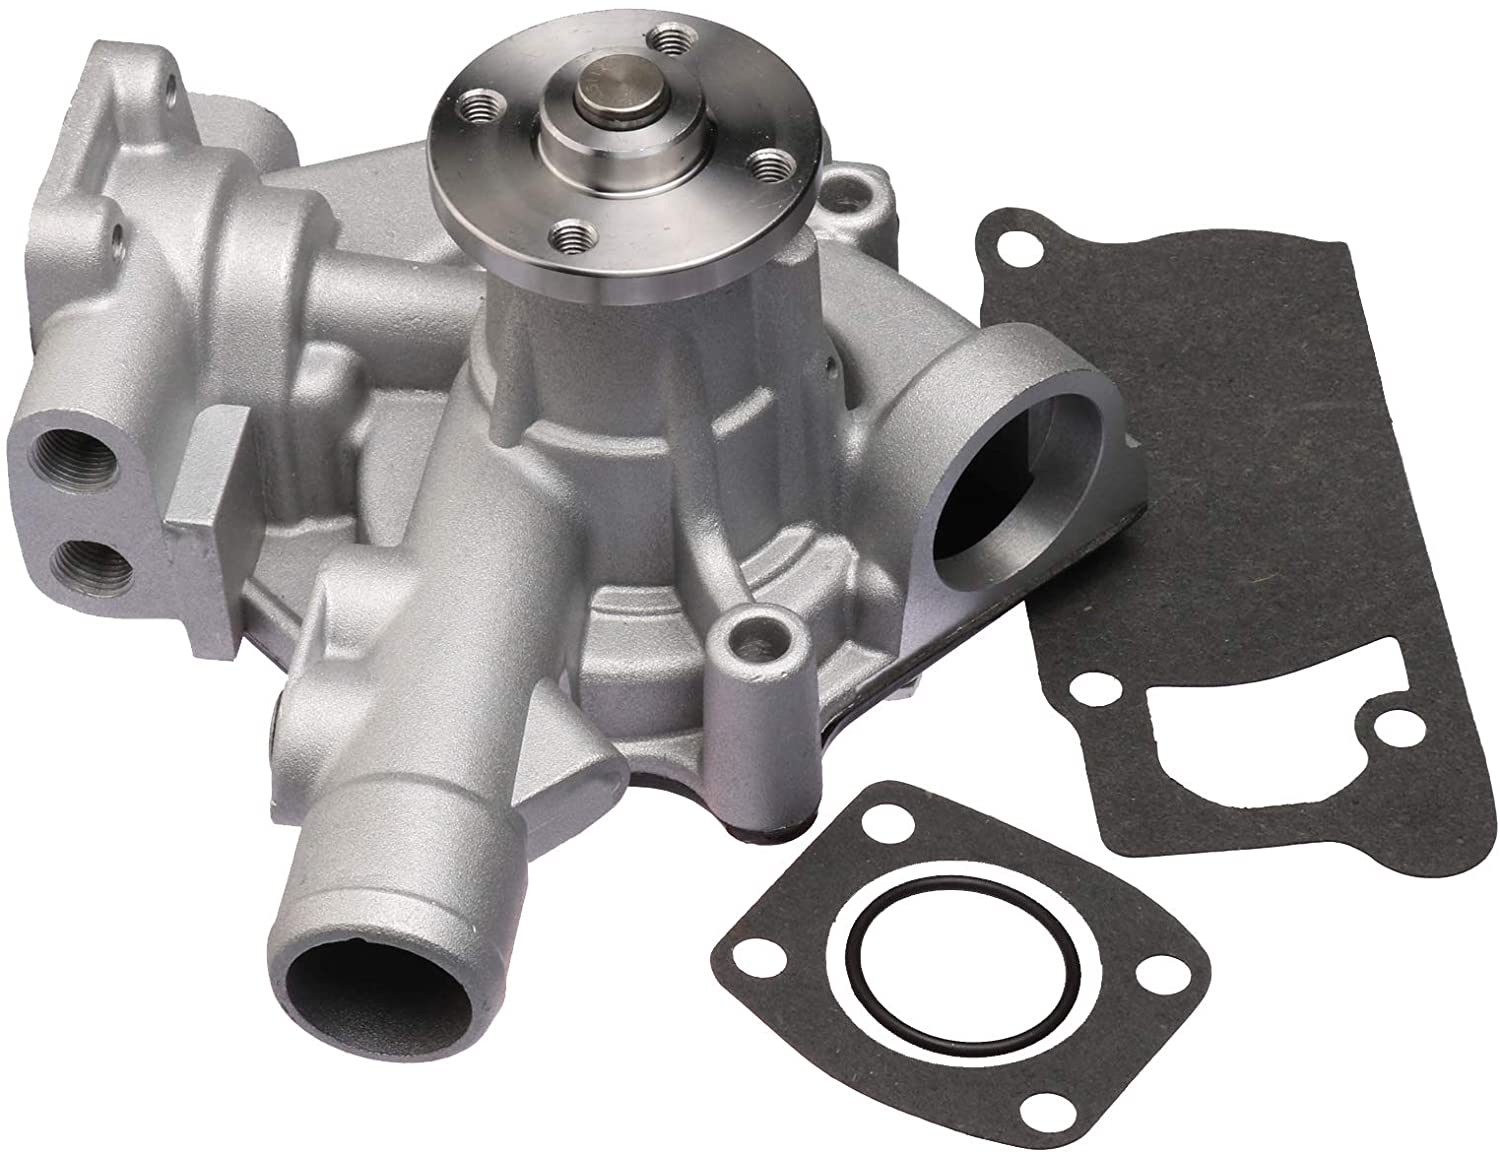 Water Pump 129919-42010 for Yanmar 4TNE98-NMH & 4TNE94-NMH 4TNE92-NMH Engine - KUDUPARTS